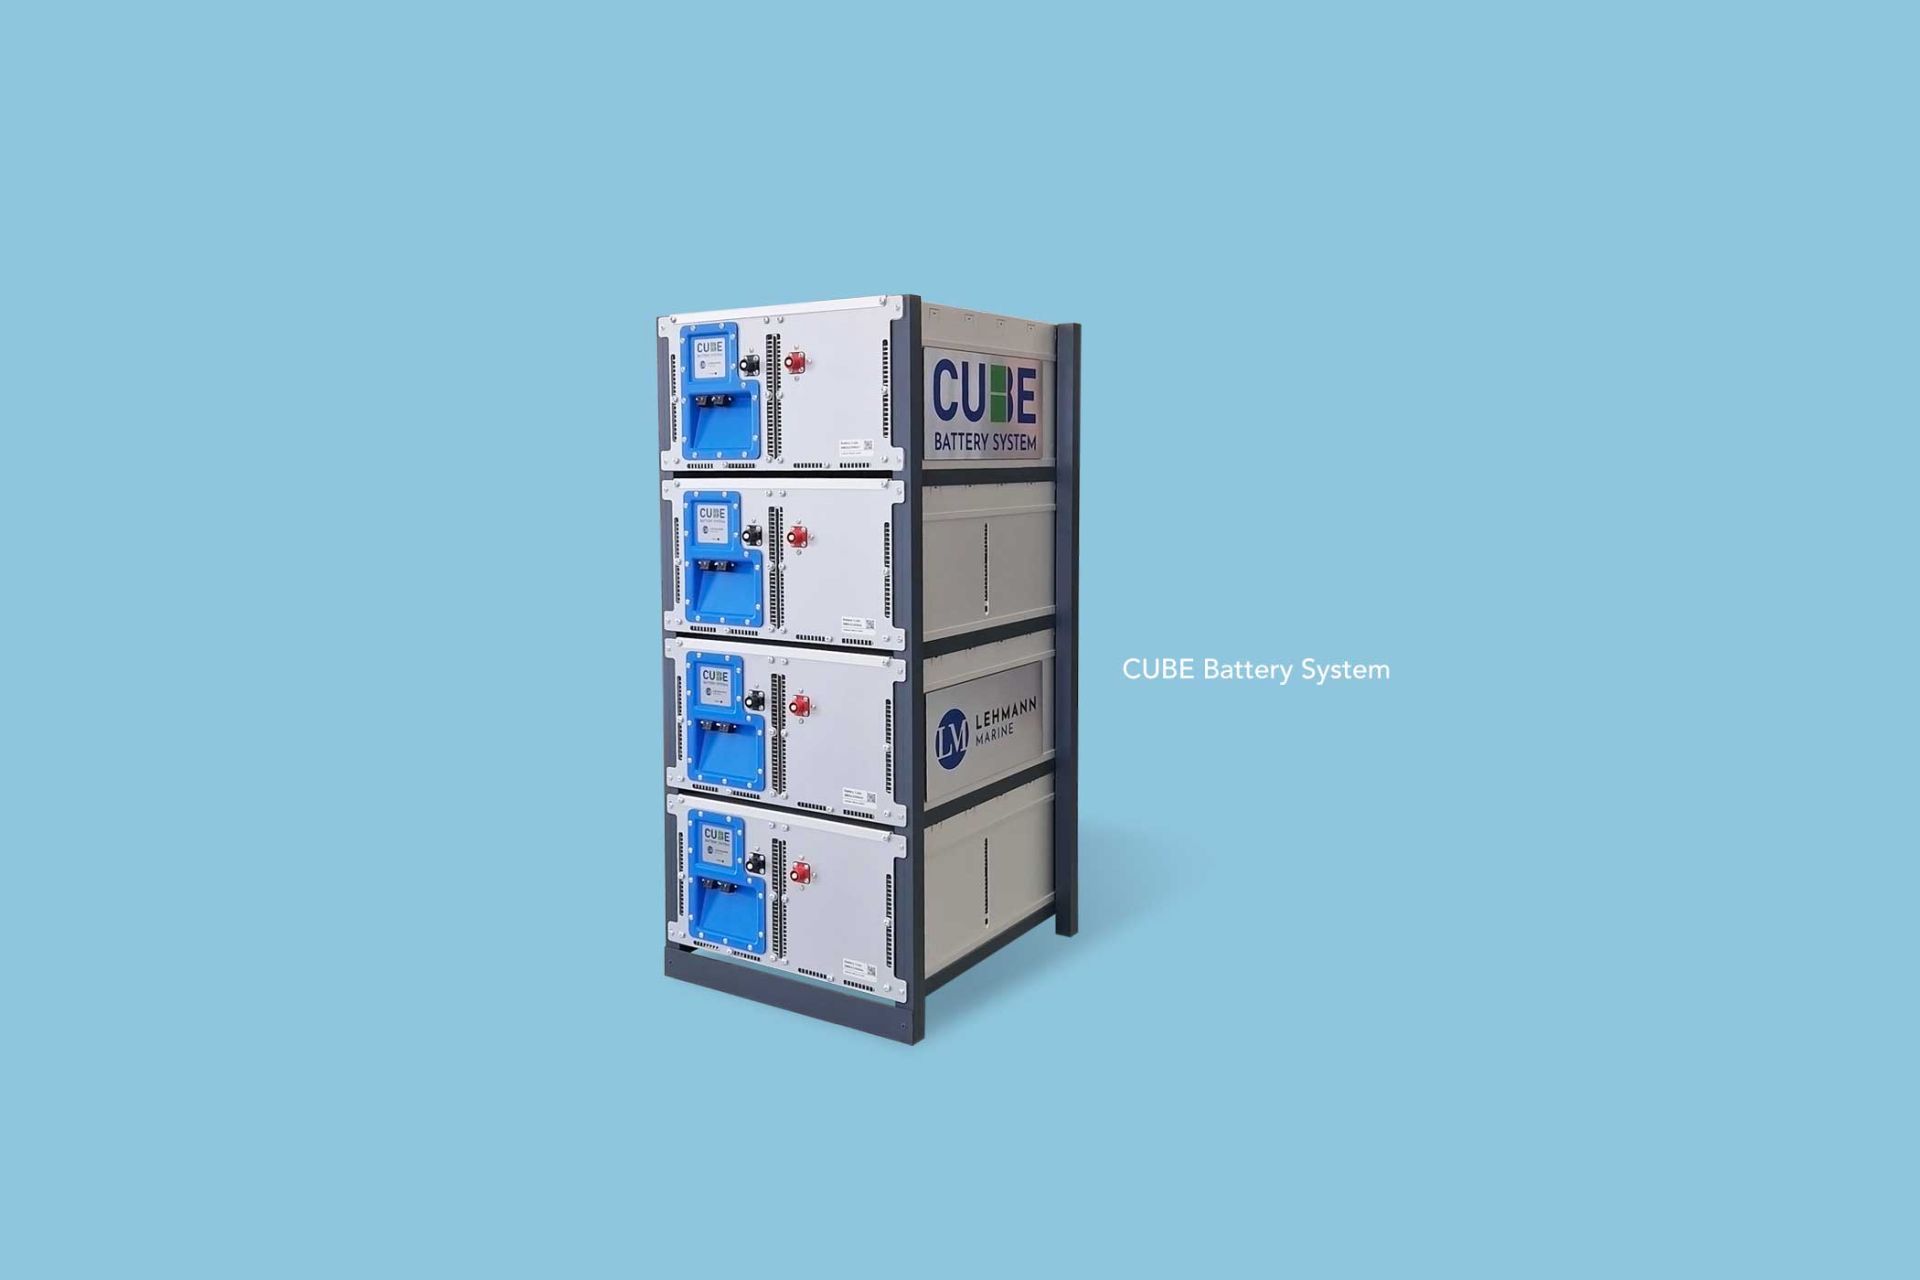 Introducing the flexible, modular and safe CUBE battery system with advanced energy density